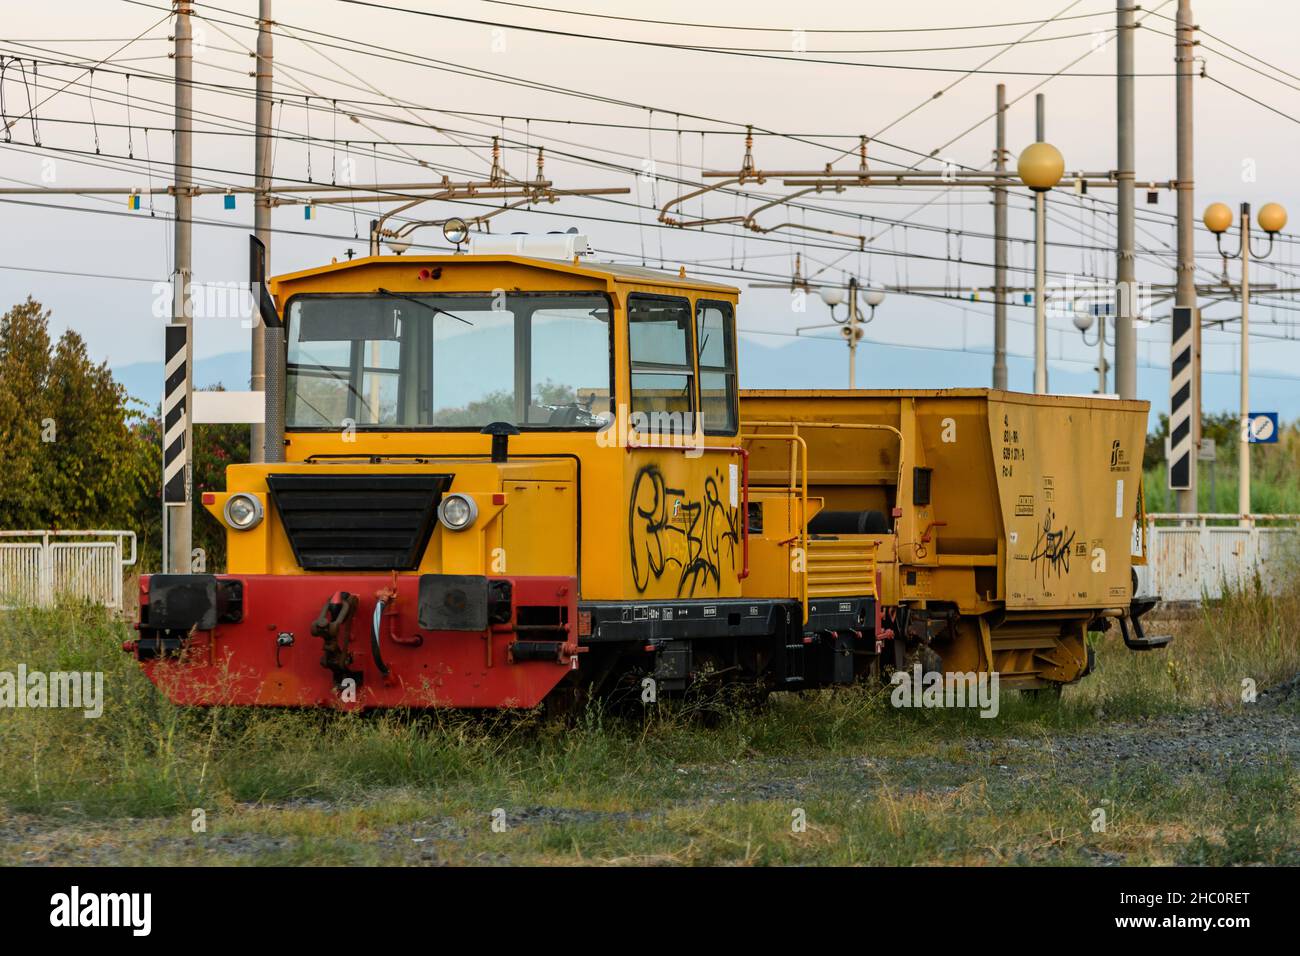 Locomotive wagons for railway line maintenance parked on a siding Stock Photo